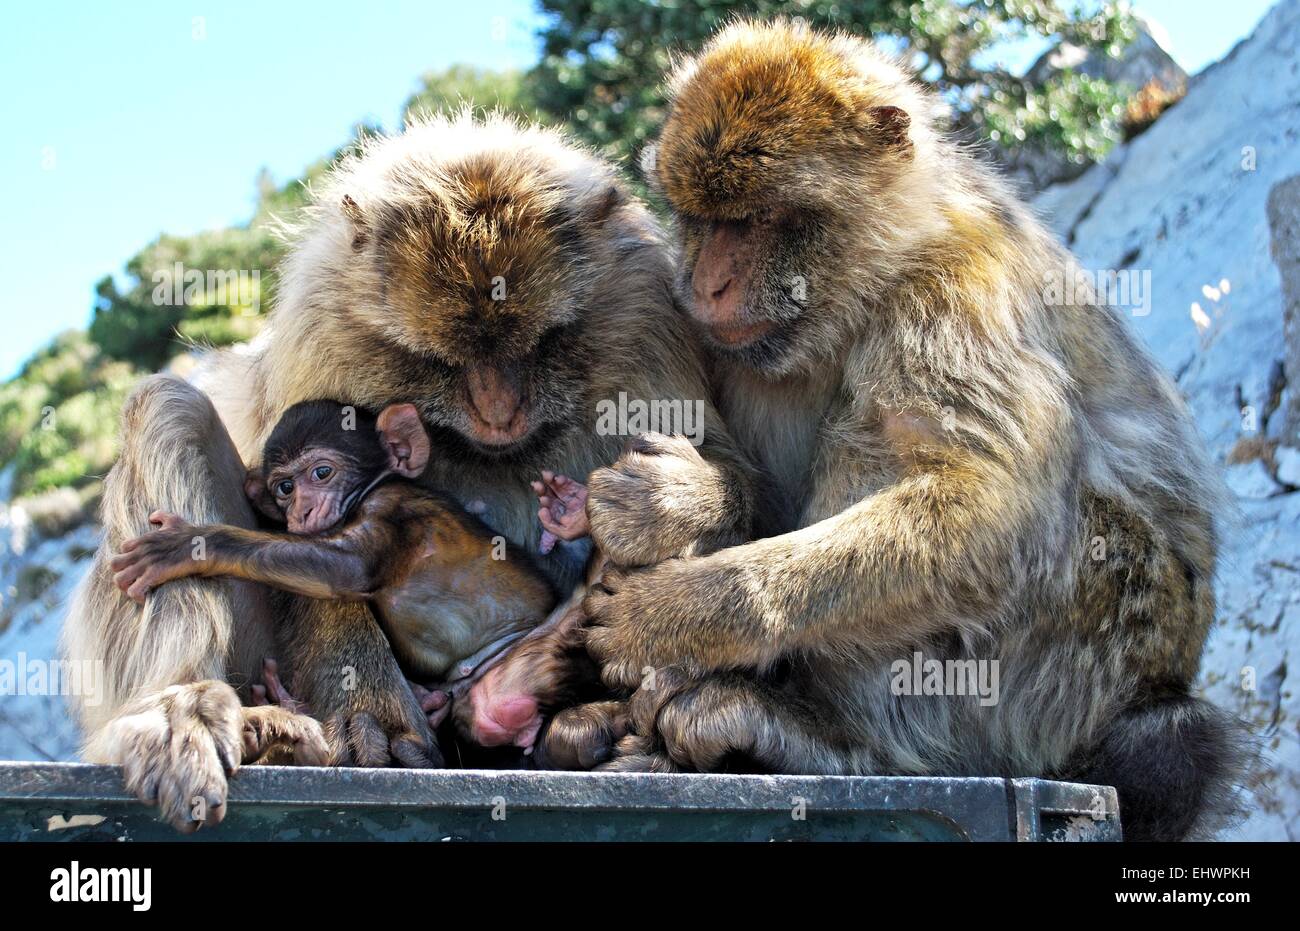 Two Barbary Apes holding their baby, Gibraltar, United Kingdom, Western Europe. Stock Photo